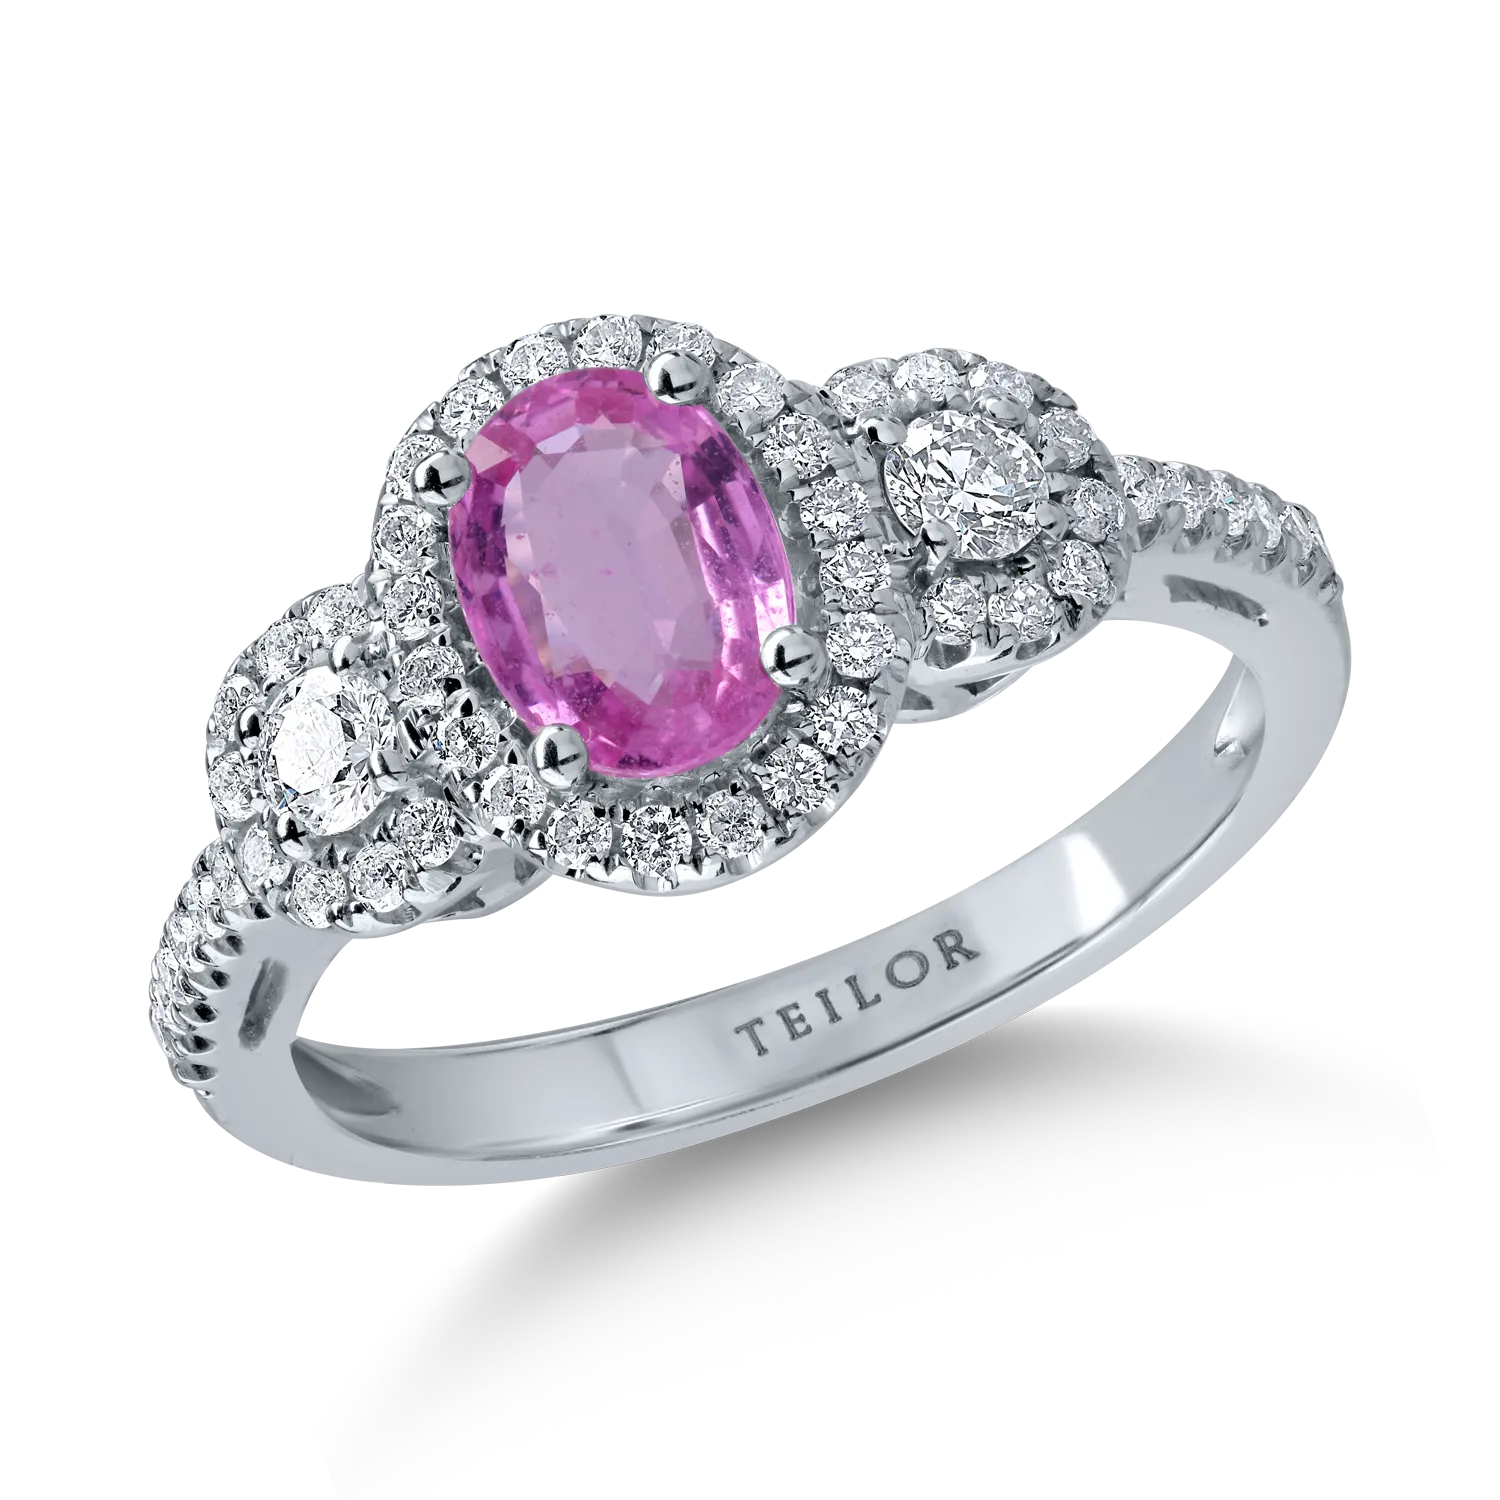 White gold ring with 0.99ct pink sapphire and 0.51ct diamonds